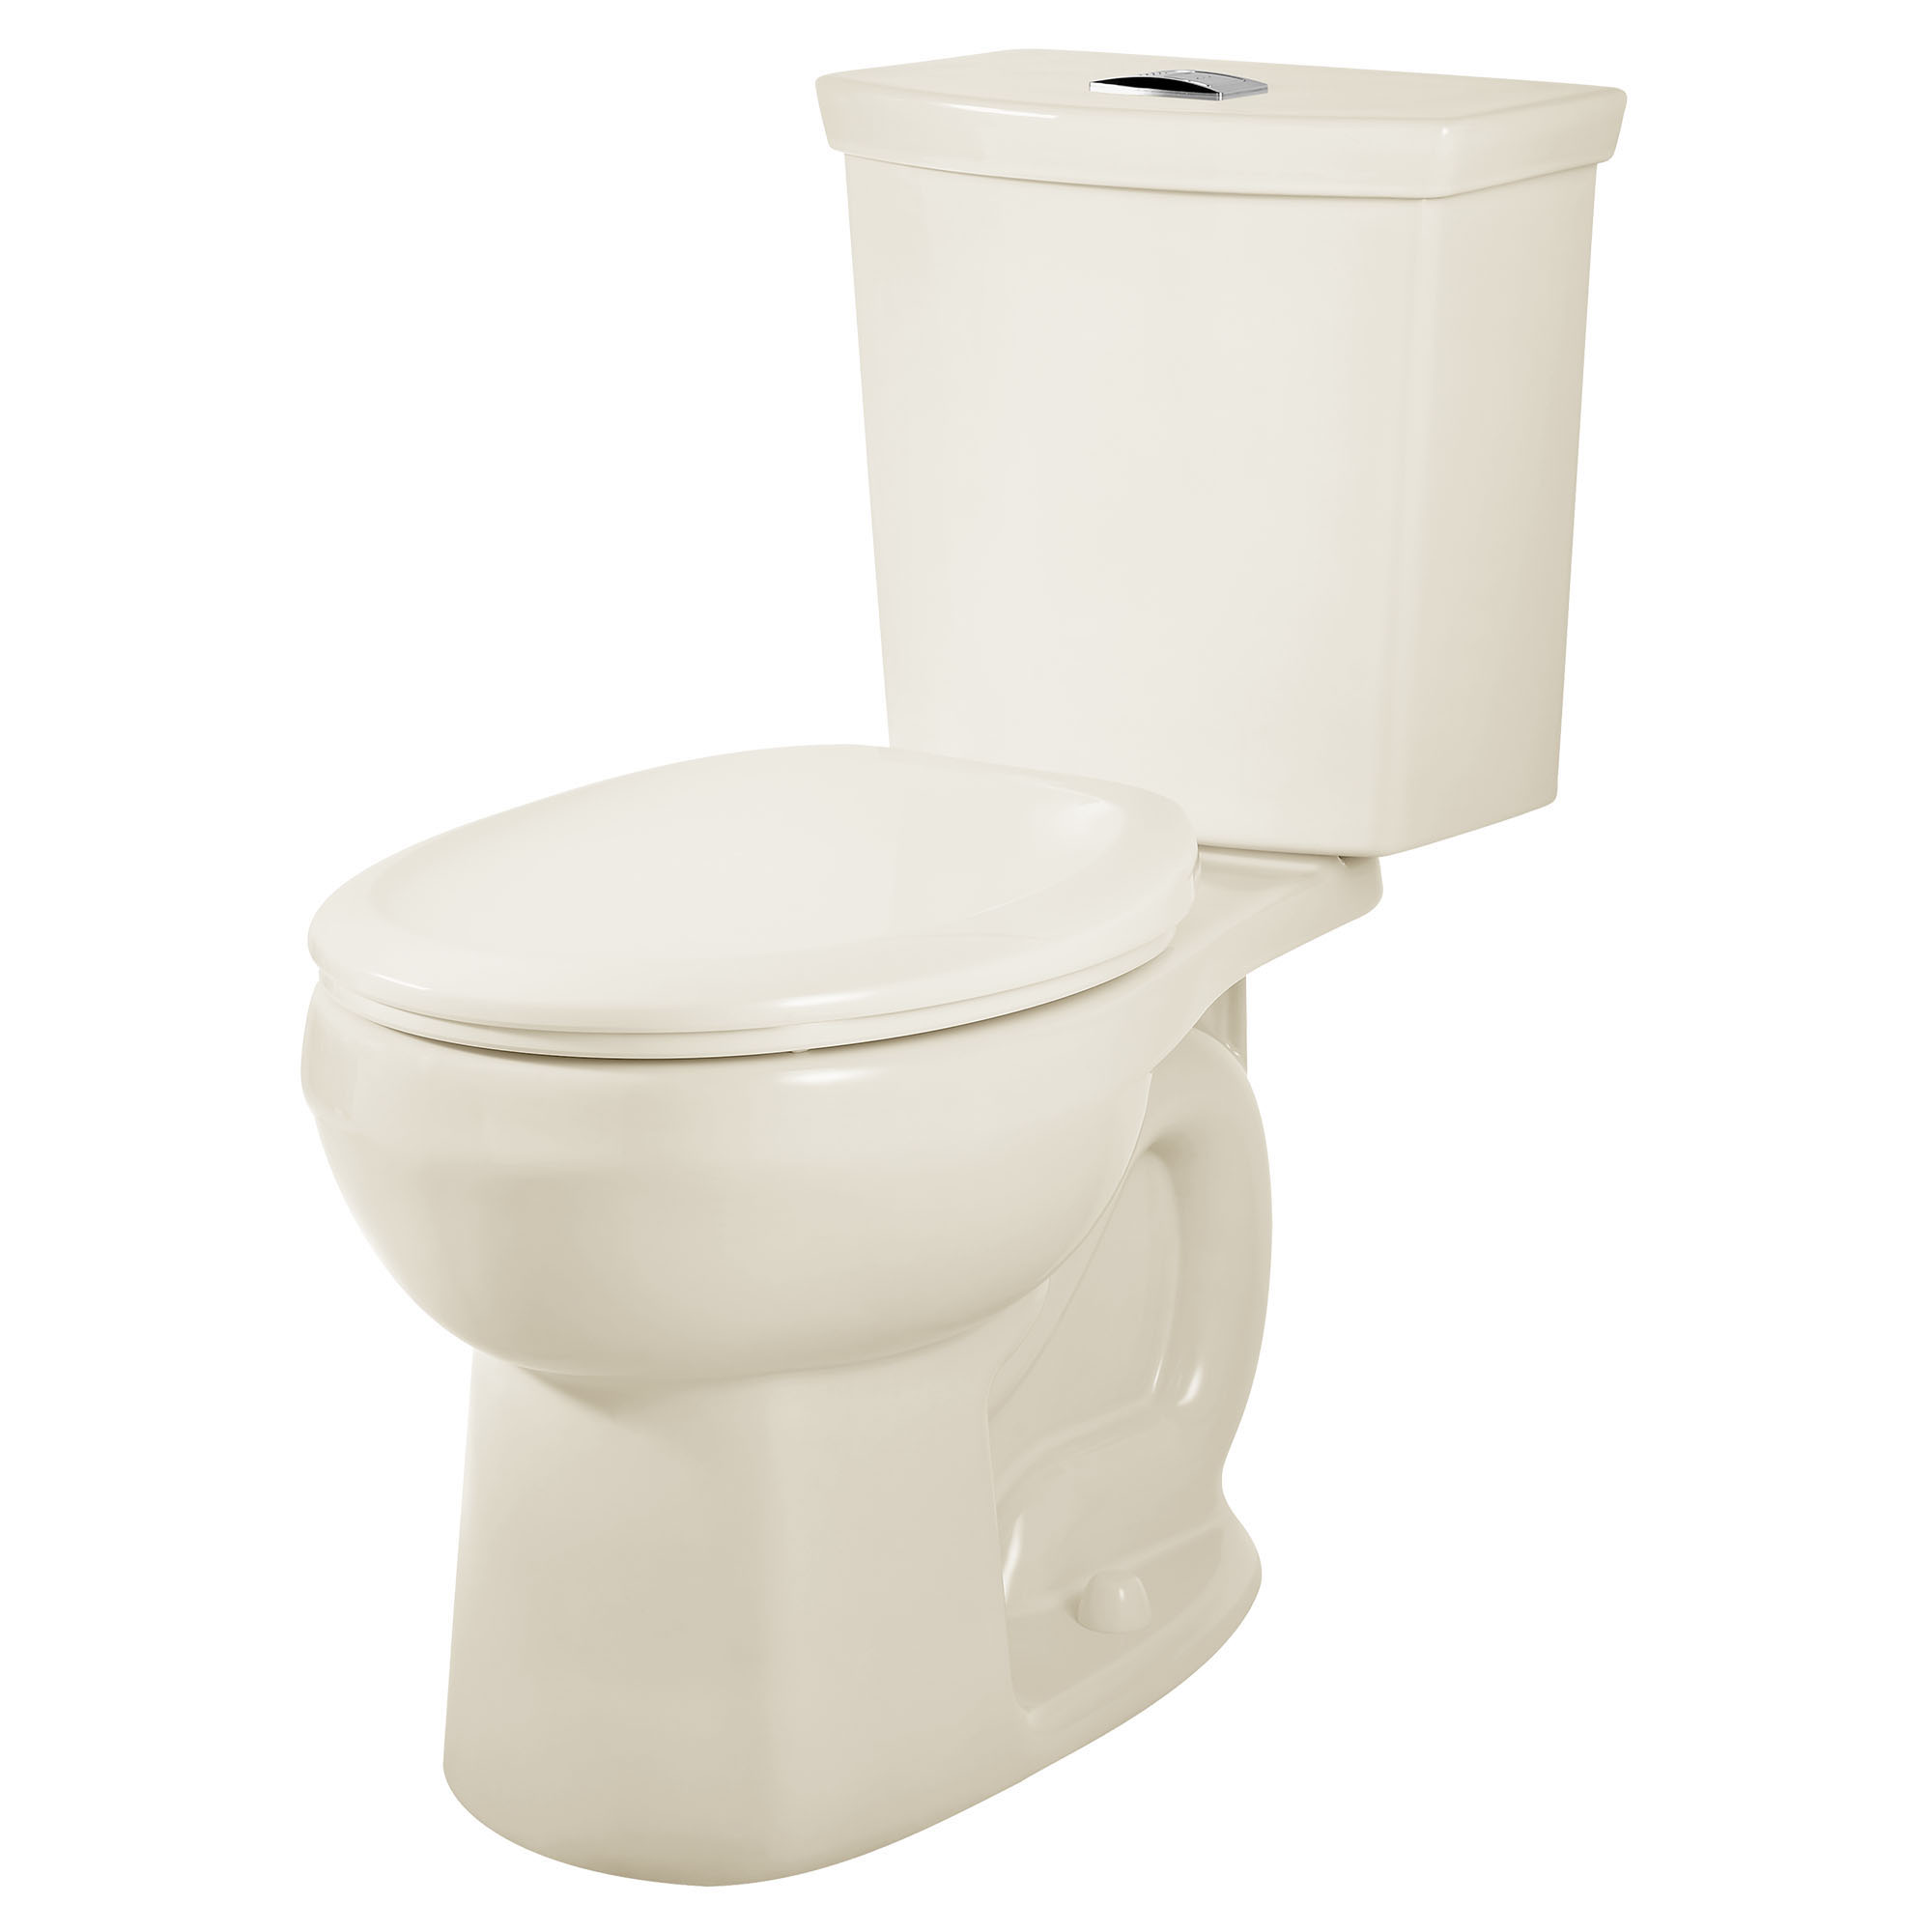 H2Option® Two-Piece Dual Flush 1.28 gpf/4.8 Lpf and 0.92 gpf/3.5 Lpf Standard Height Round Front Toilet Less Seat